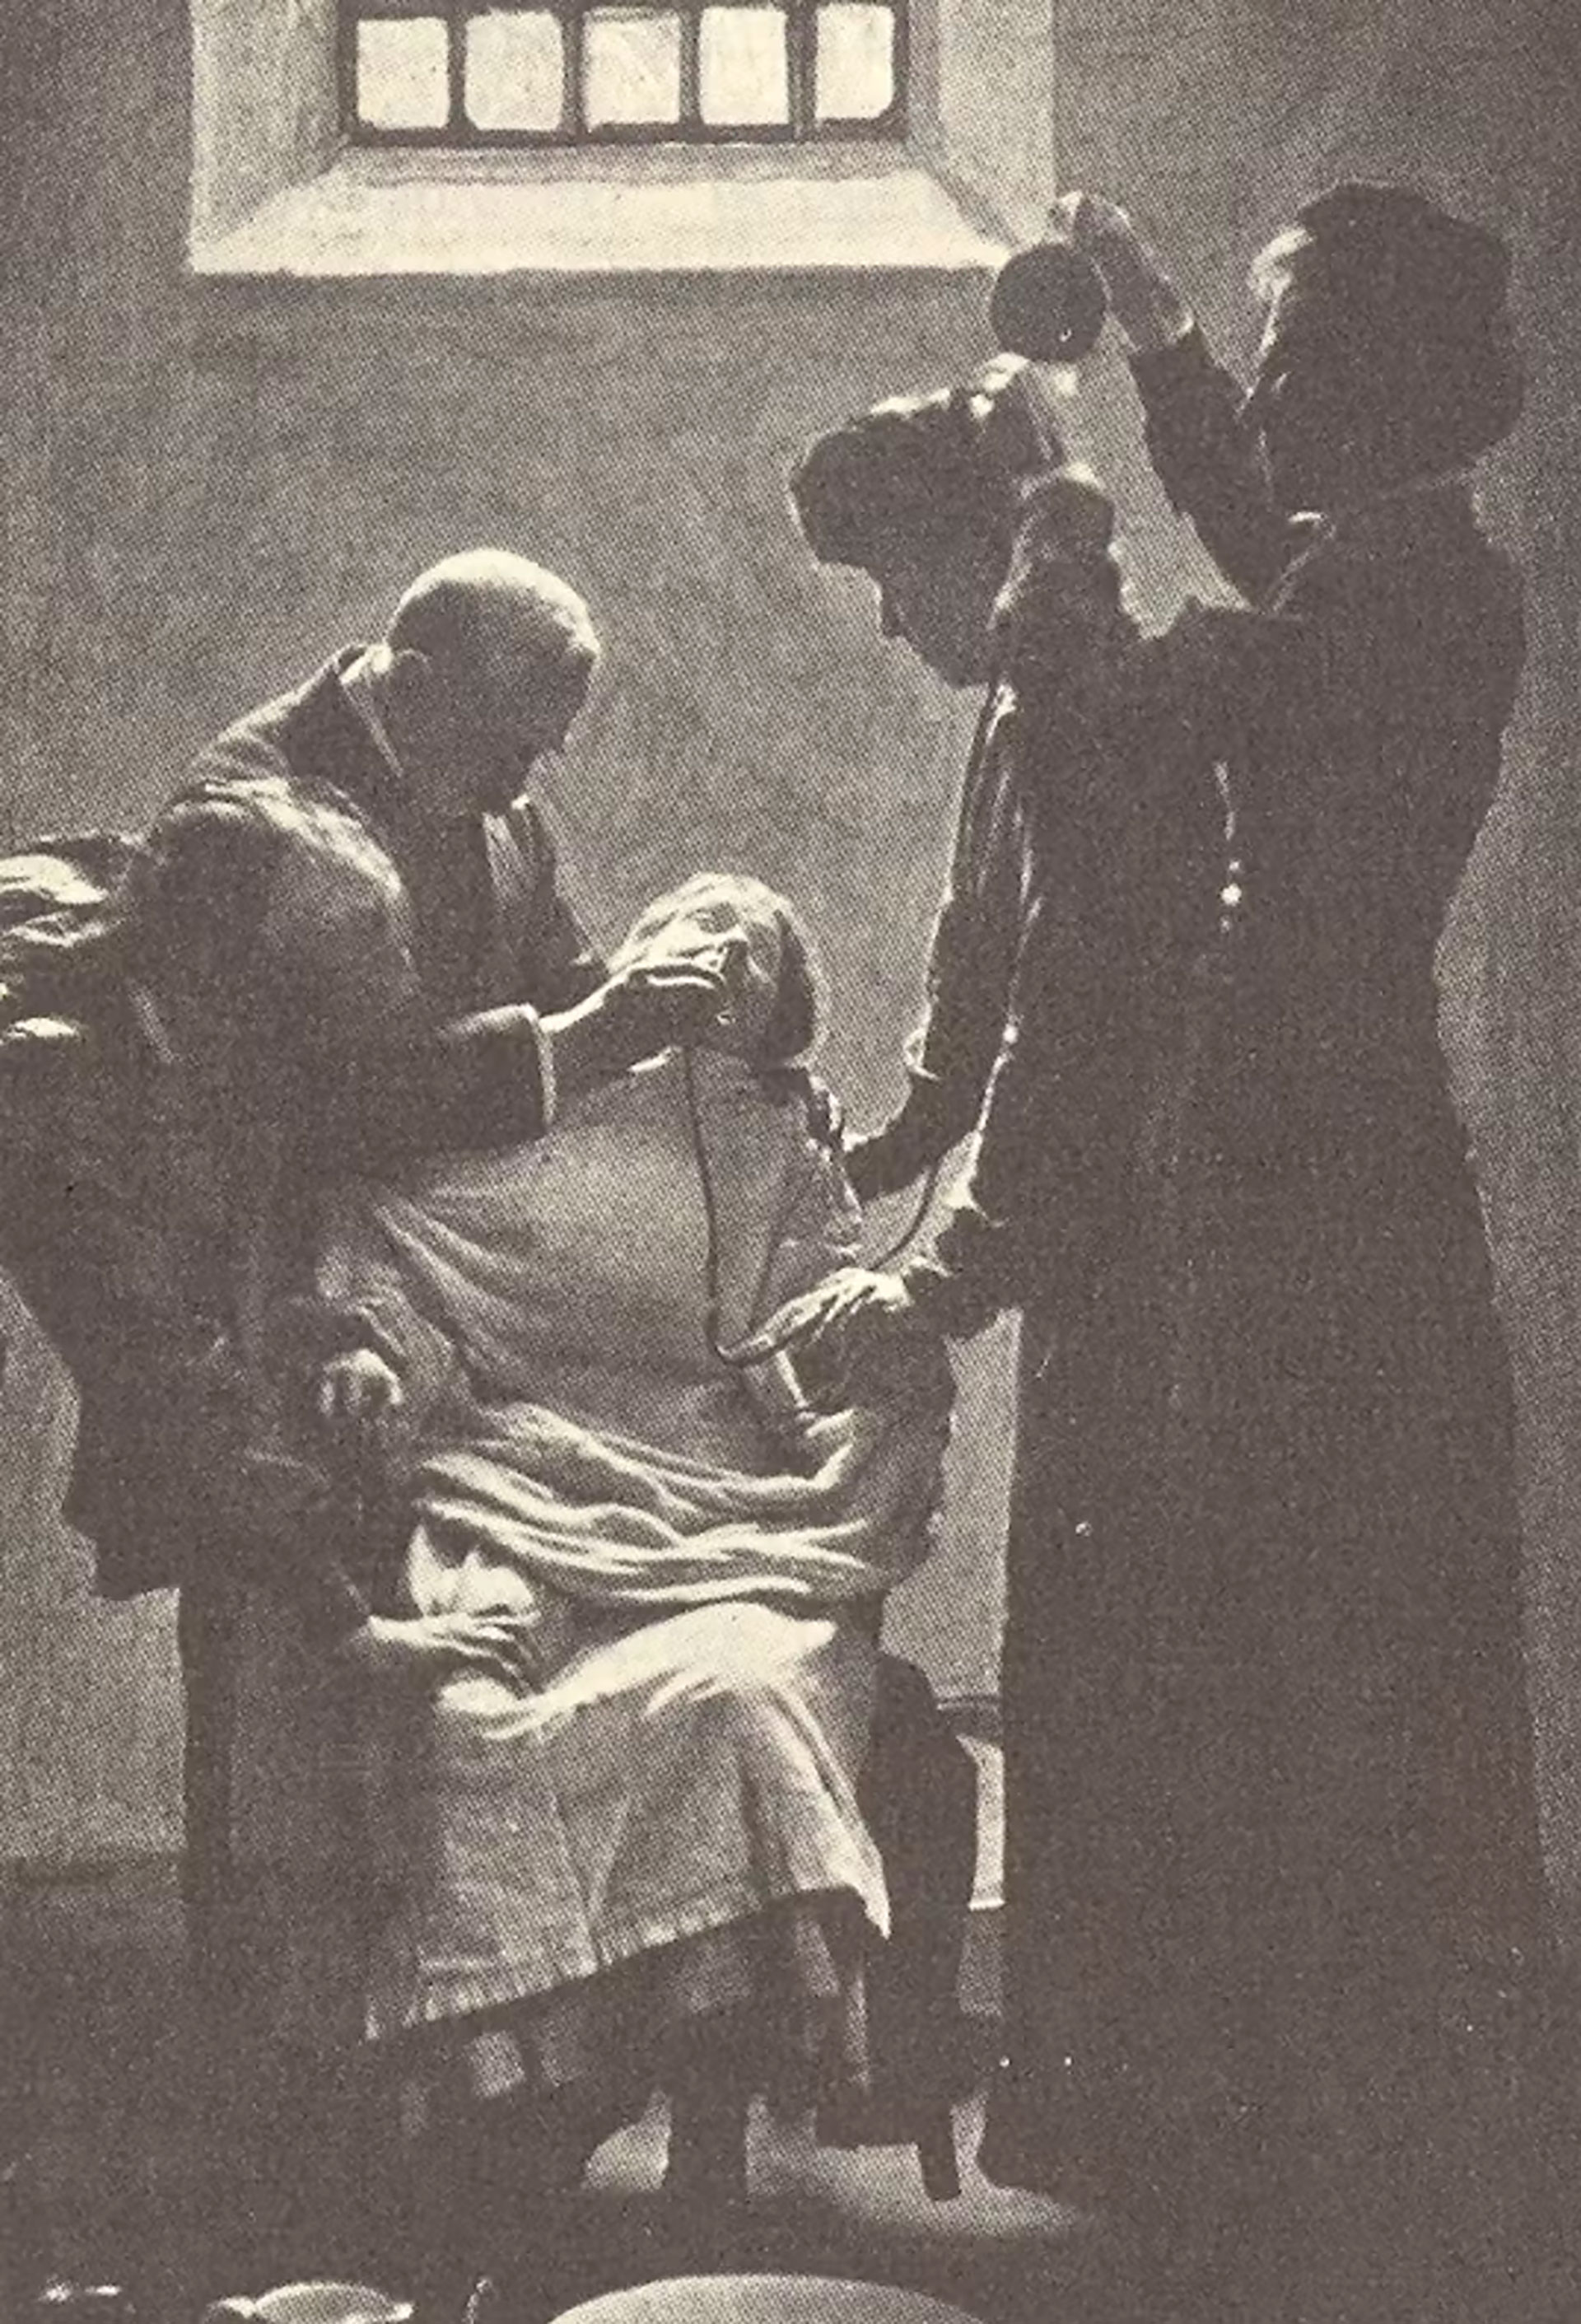 A suffragette on hunger strike force-fed with a nasal tube (The Conversation)